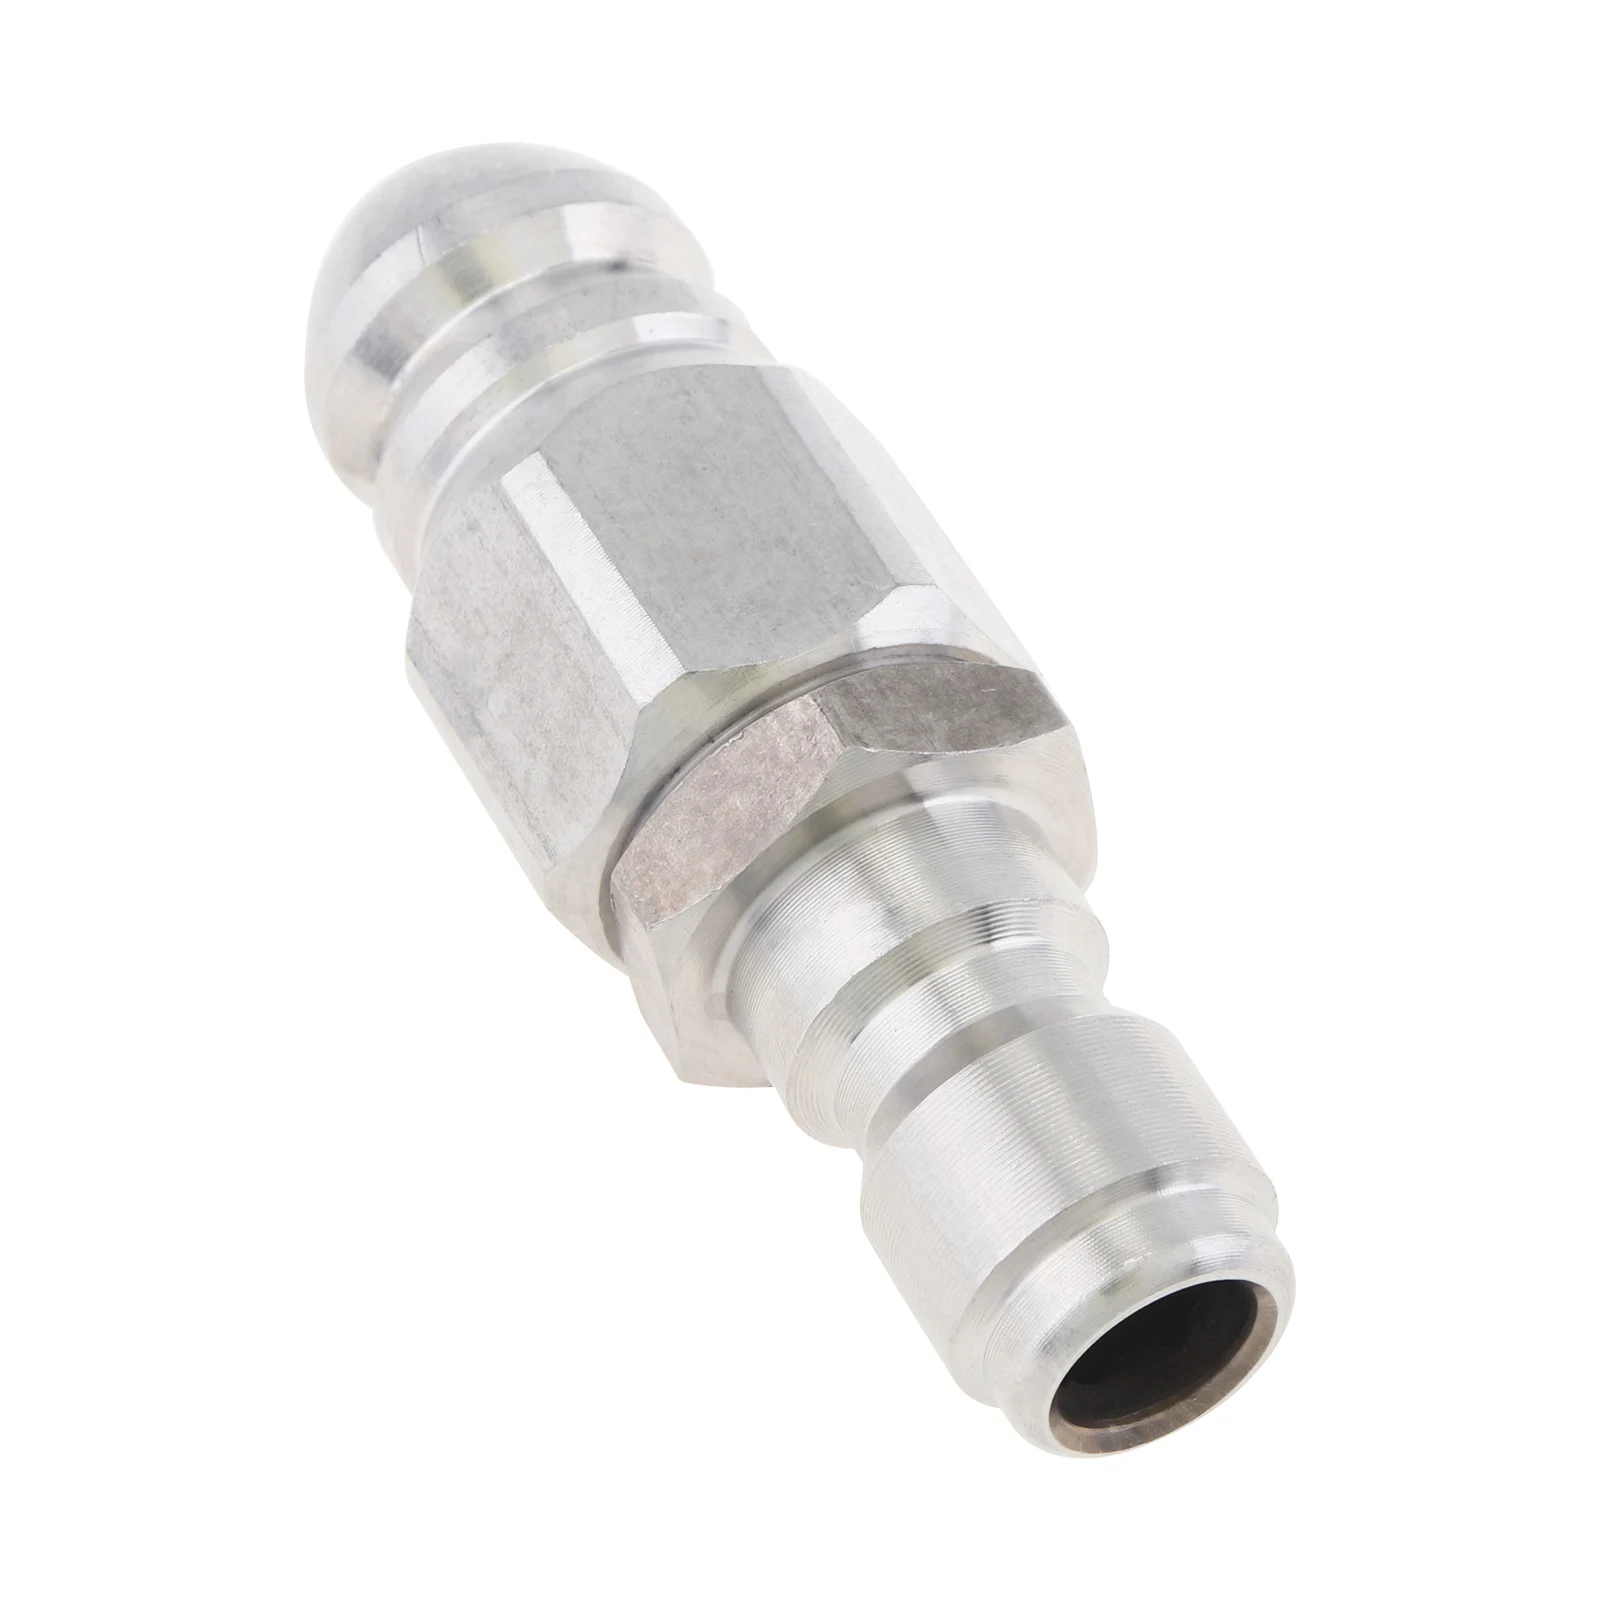 Pressure Washer Sewer Jetter Nozzle Mini Compact Quickly Connector for Drain Jetting Hose, Pressure Drain Jetter Hose Nozzle wifi antenna 4g 3g wcdma gsm full band 3dbi 600 2700mhz sma connector for mini pci card usb adapter network router